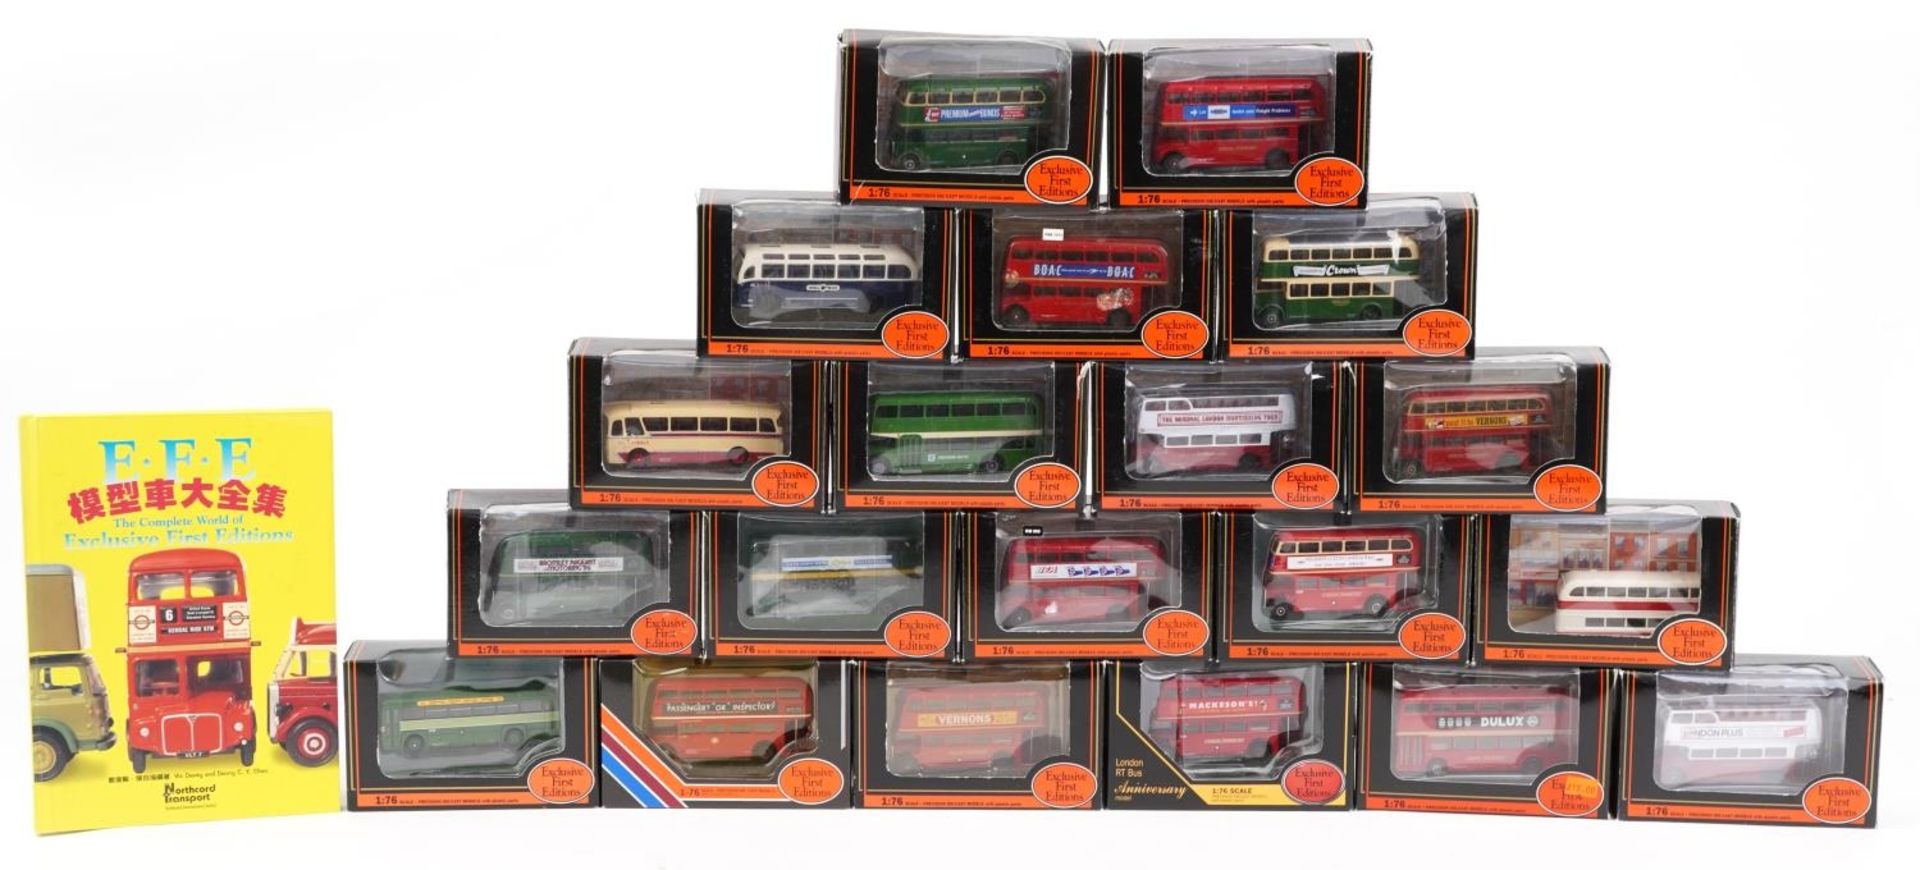 Twenty Exclusive First Editions 1:76 scale diecast model buses with boxes : For further